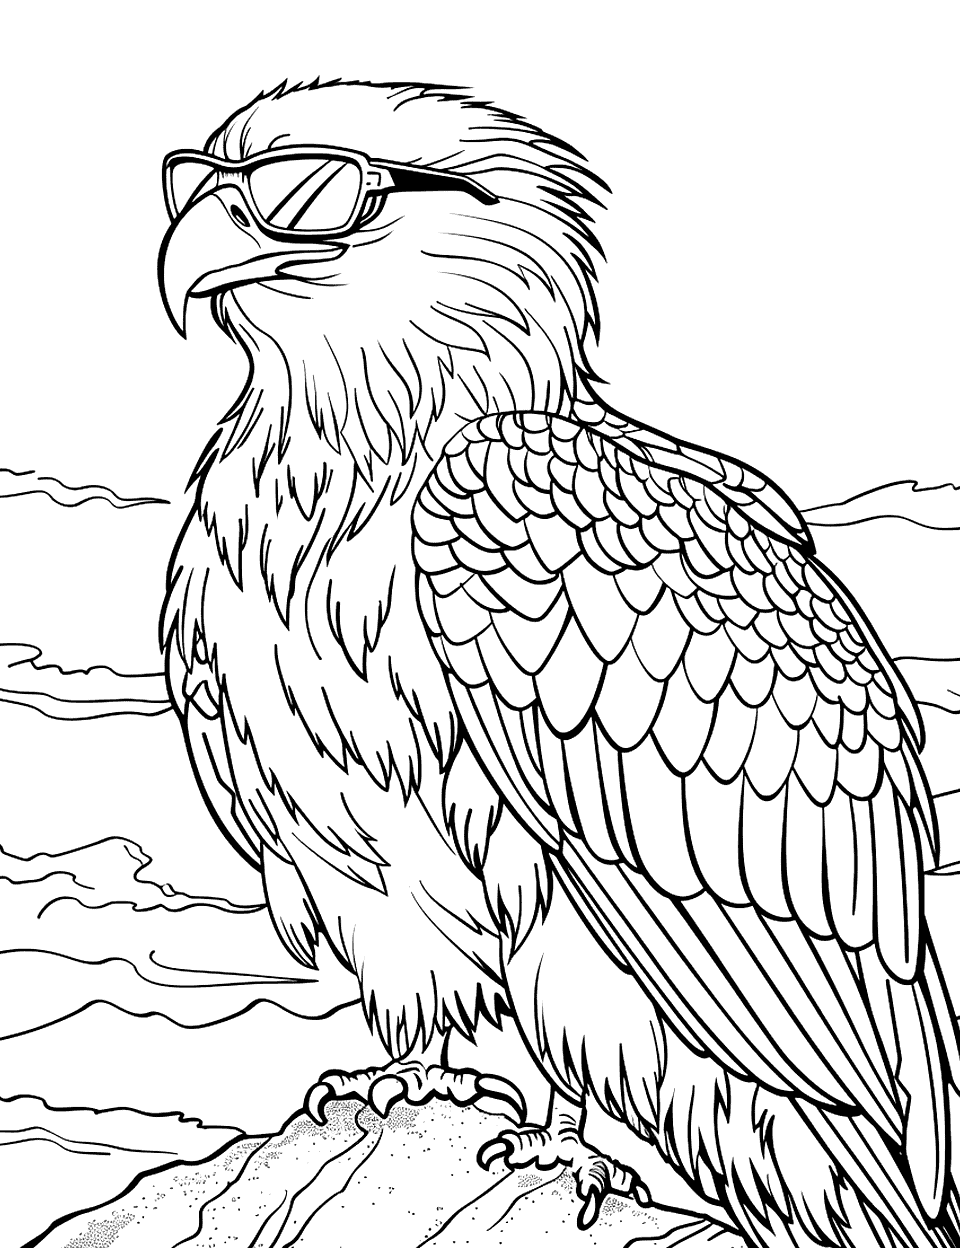 Cool Eagle Wearing Sunglasses Coloring Page - A bald eagle looks extra cool with a pair of sunglasses, sitting on a simple rock.